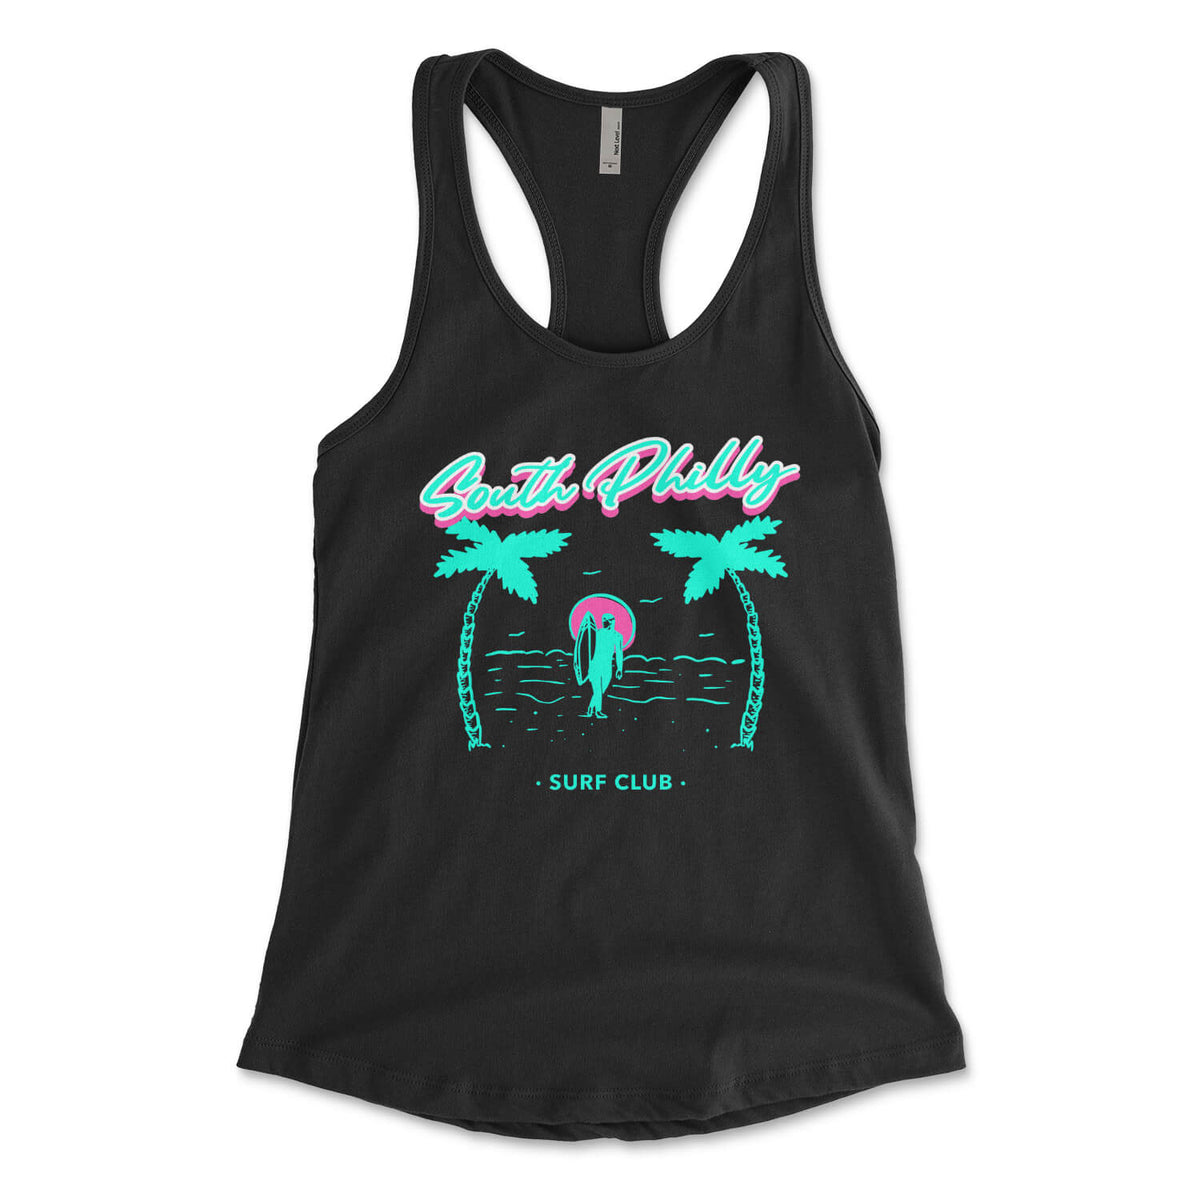 South Philly Suff Club funny womens black racerback tank top from Phillygoat